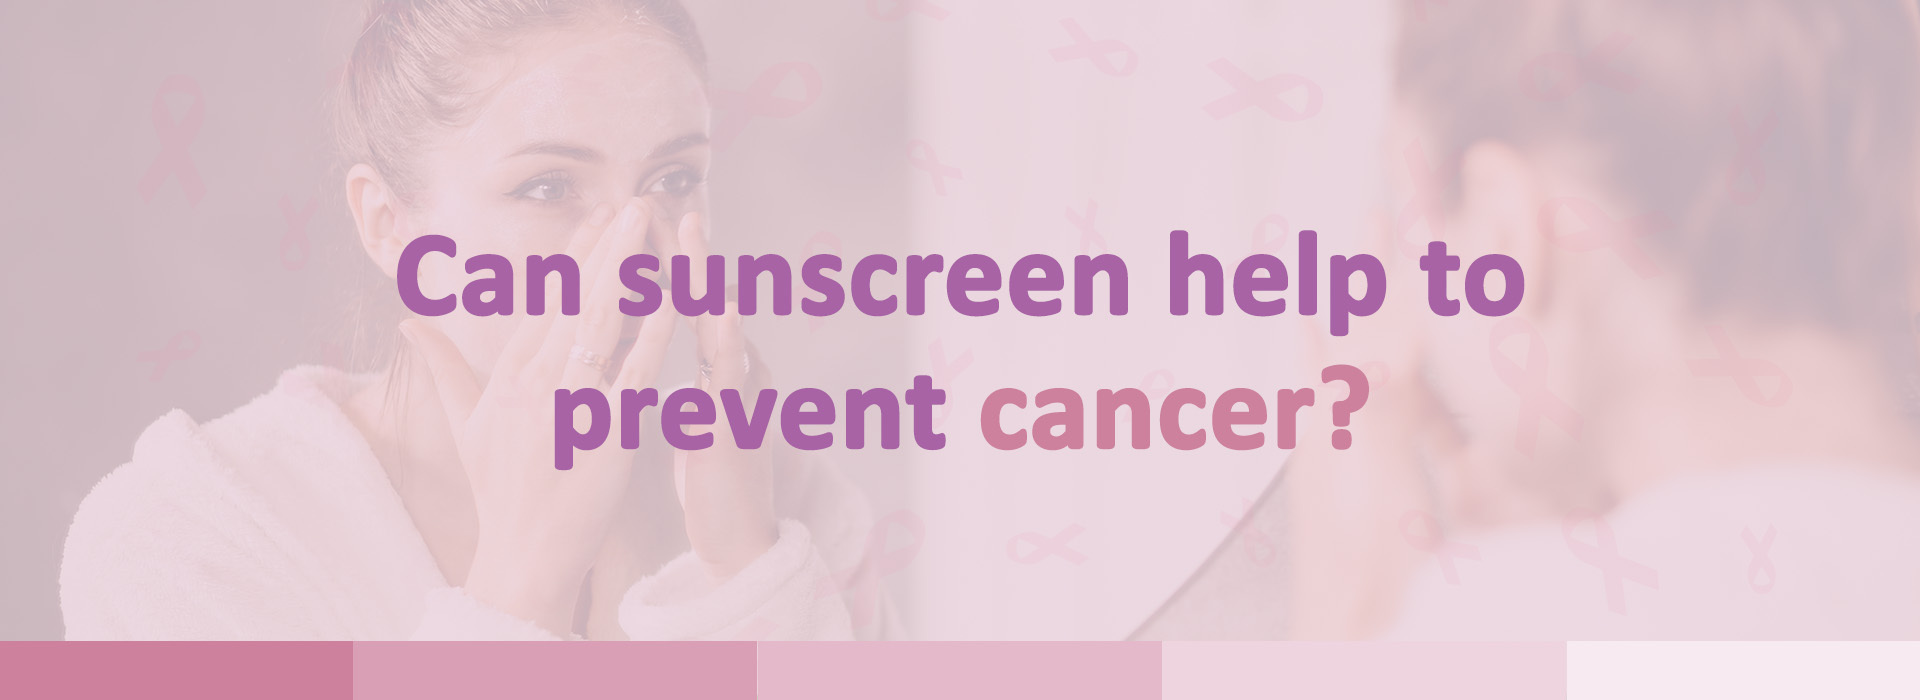 Can sunscreen help to prevent cancer?